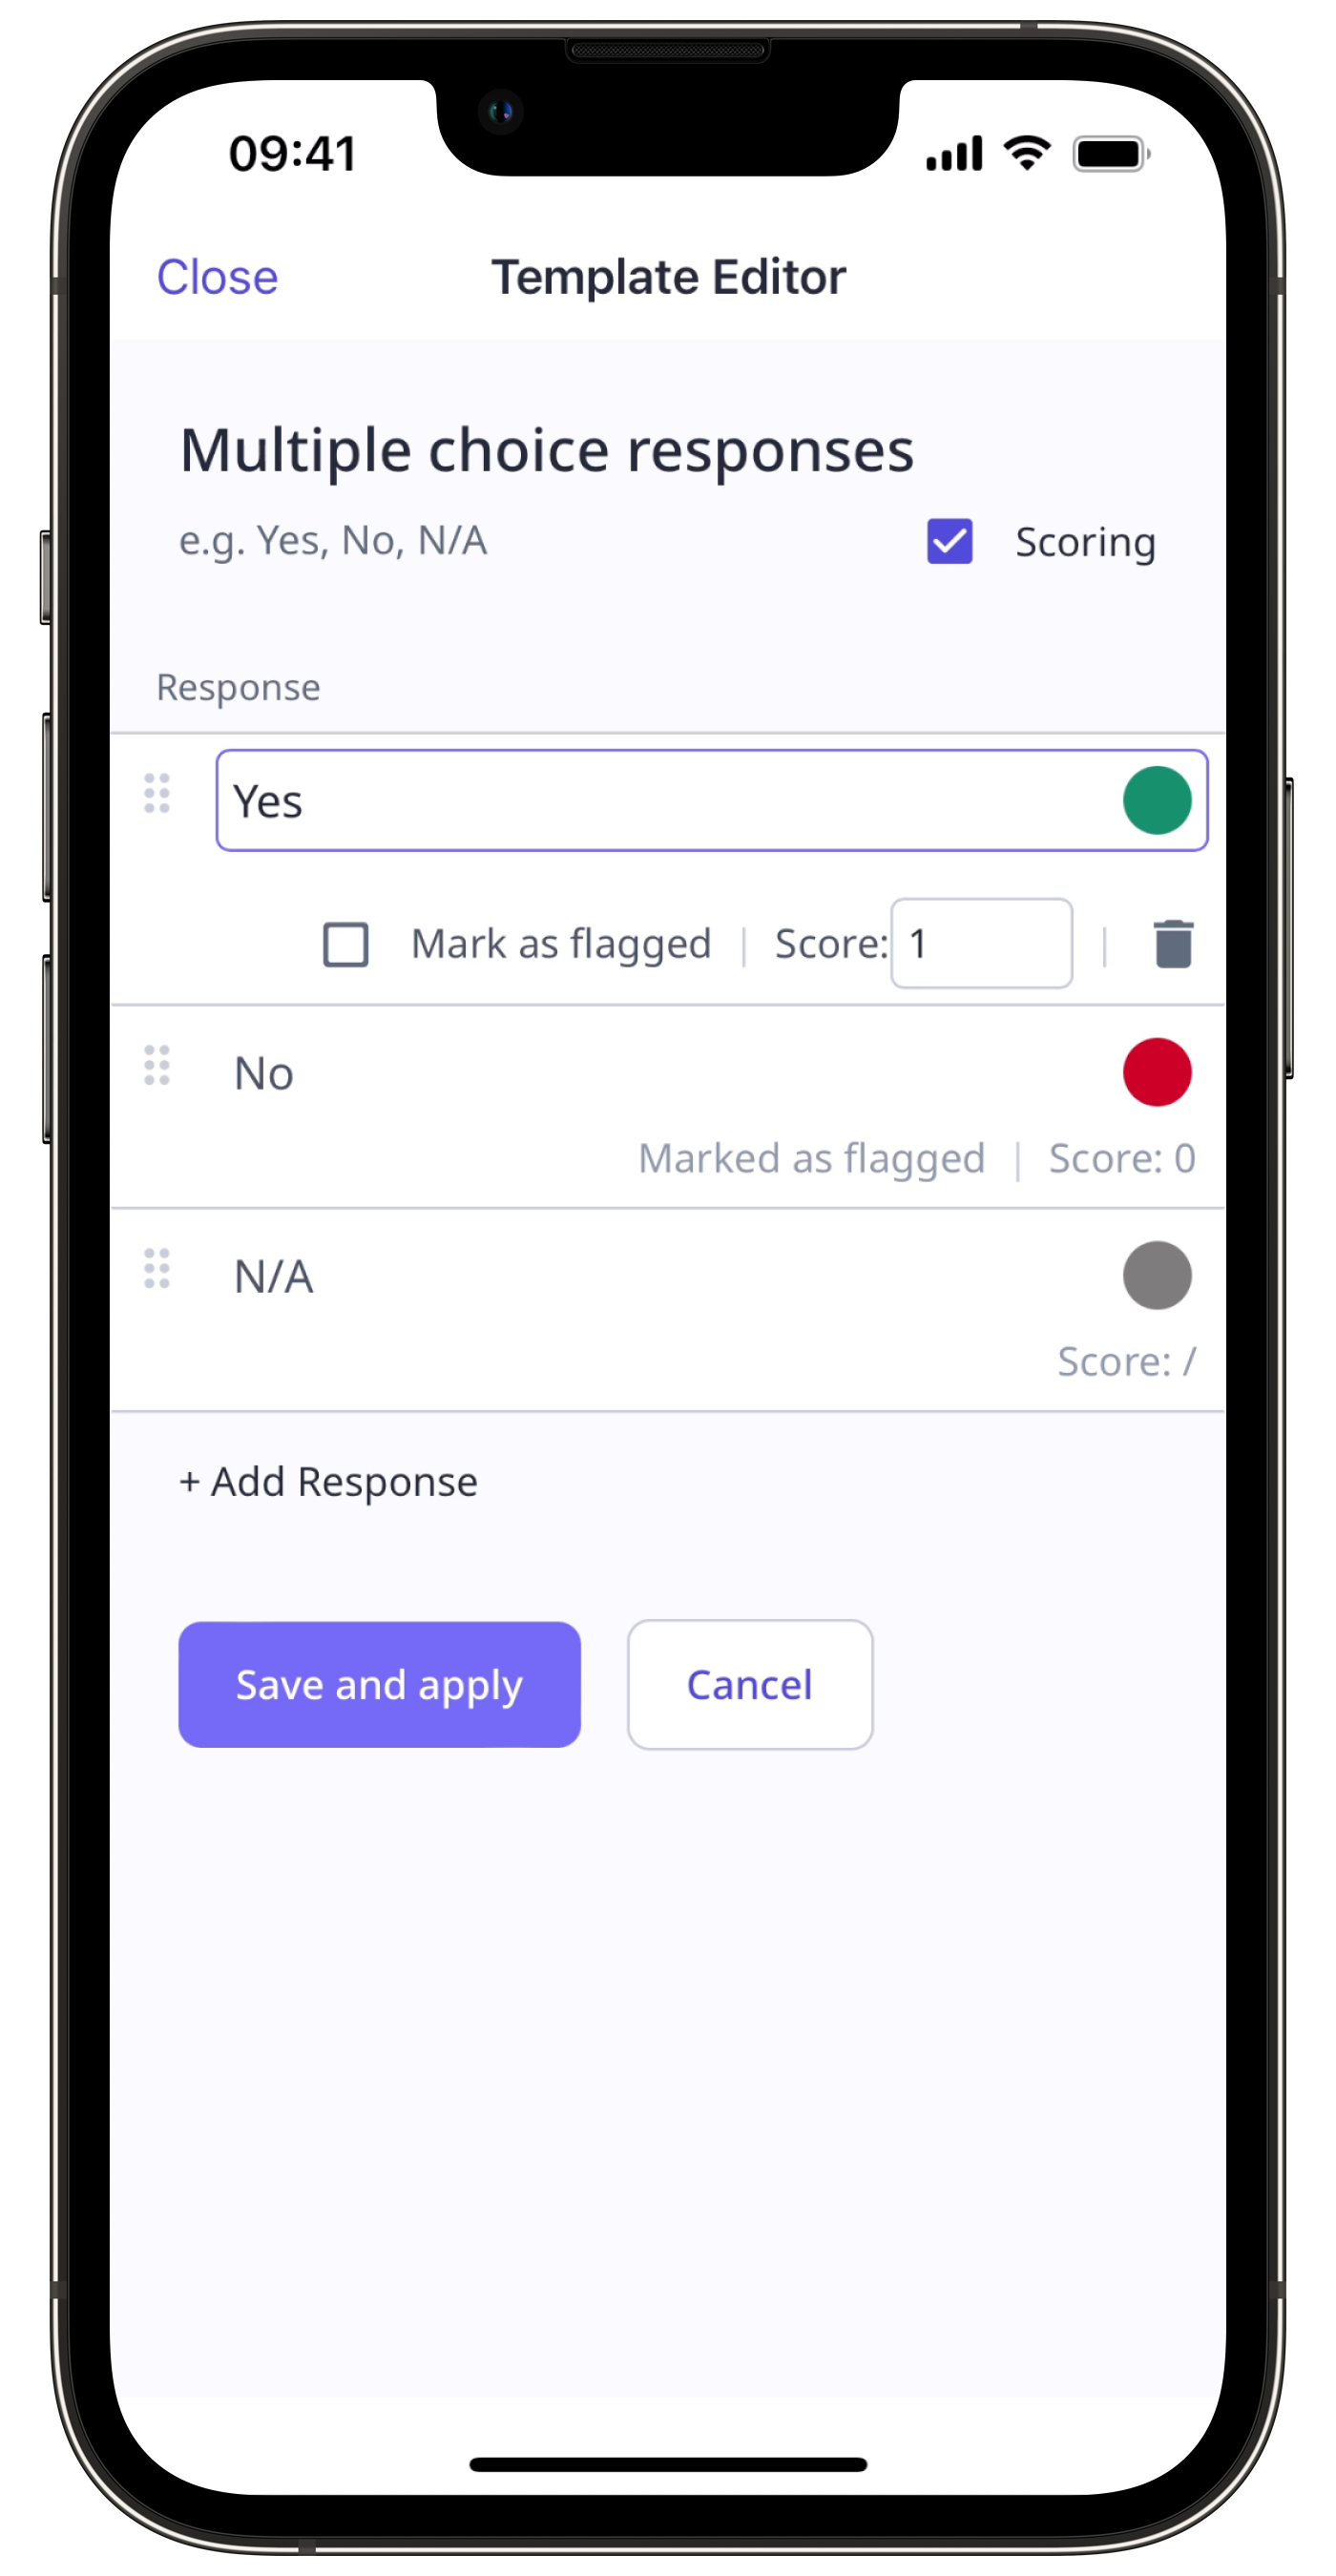 Update a custom response set in a template via the mobile app